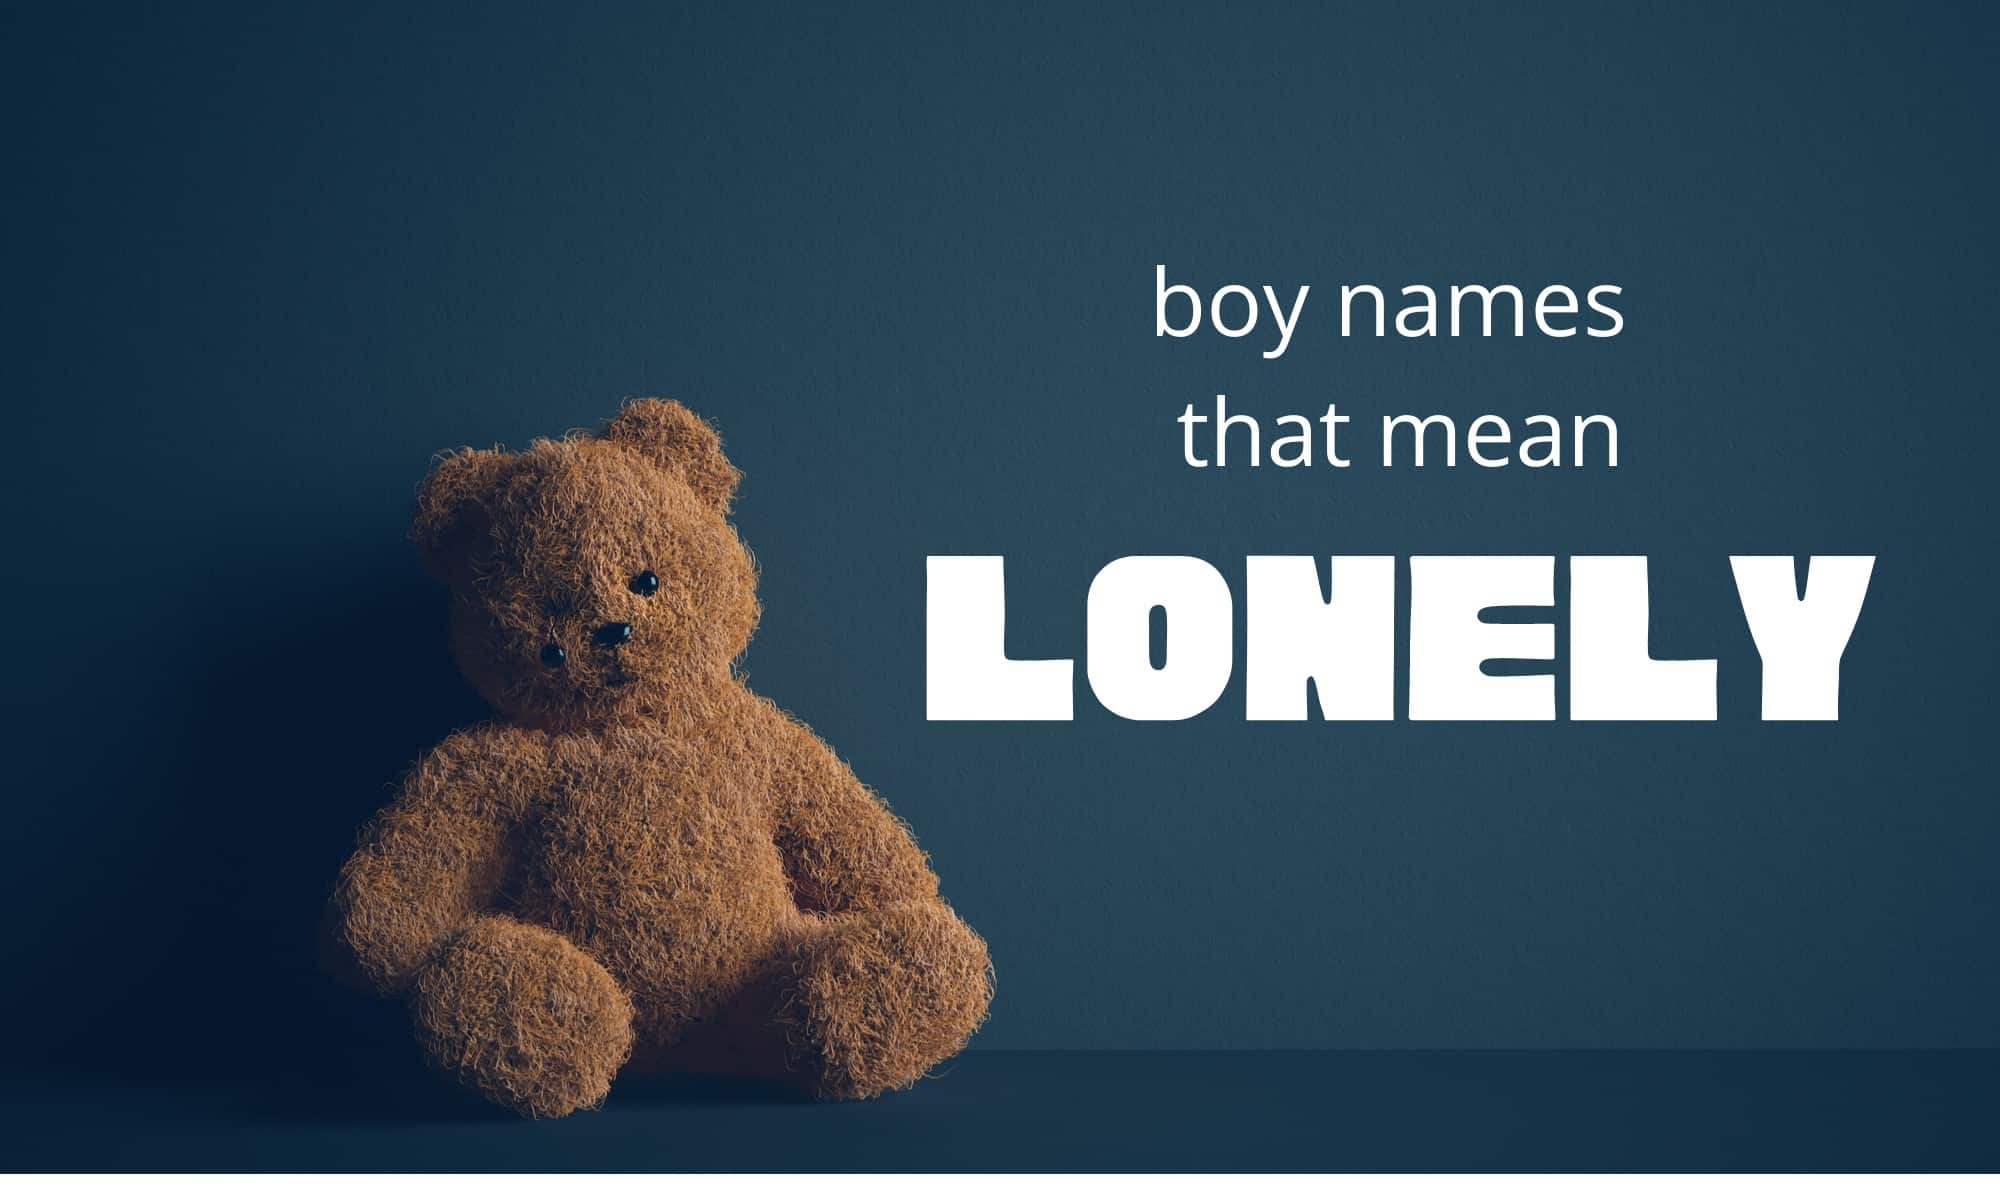 boy names that mean lonely